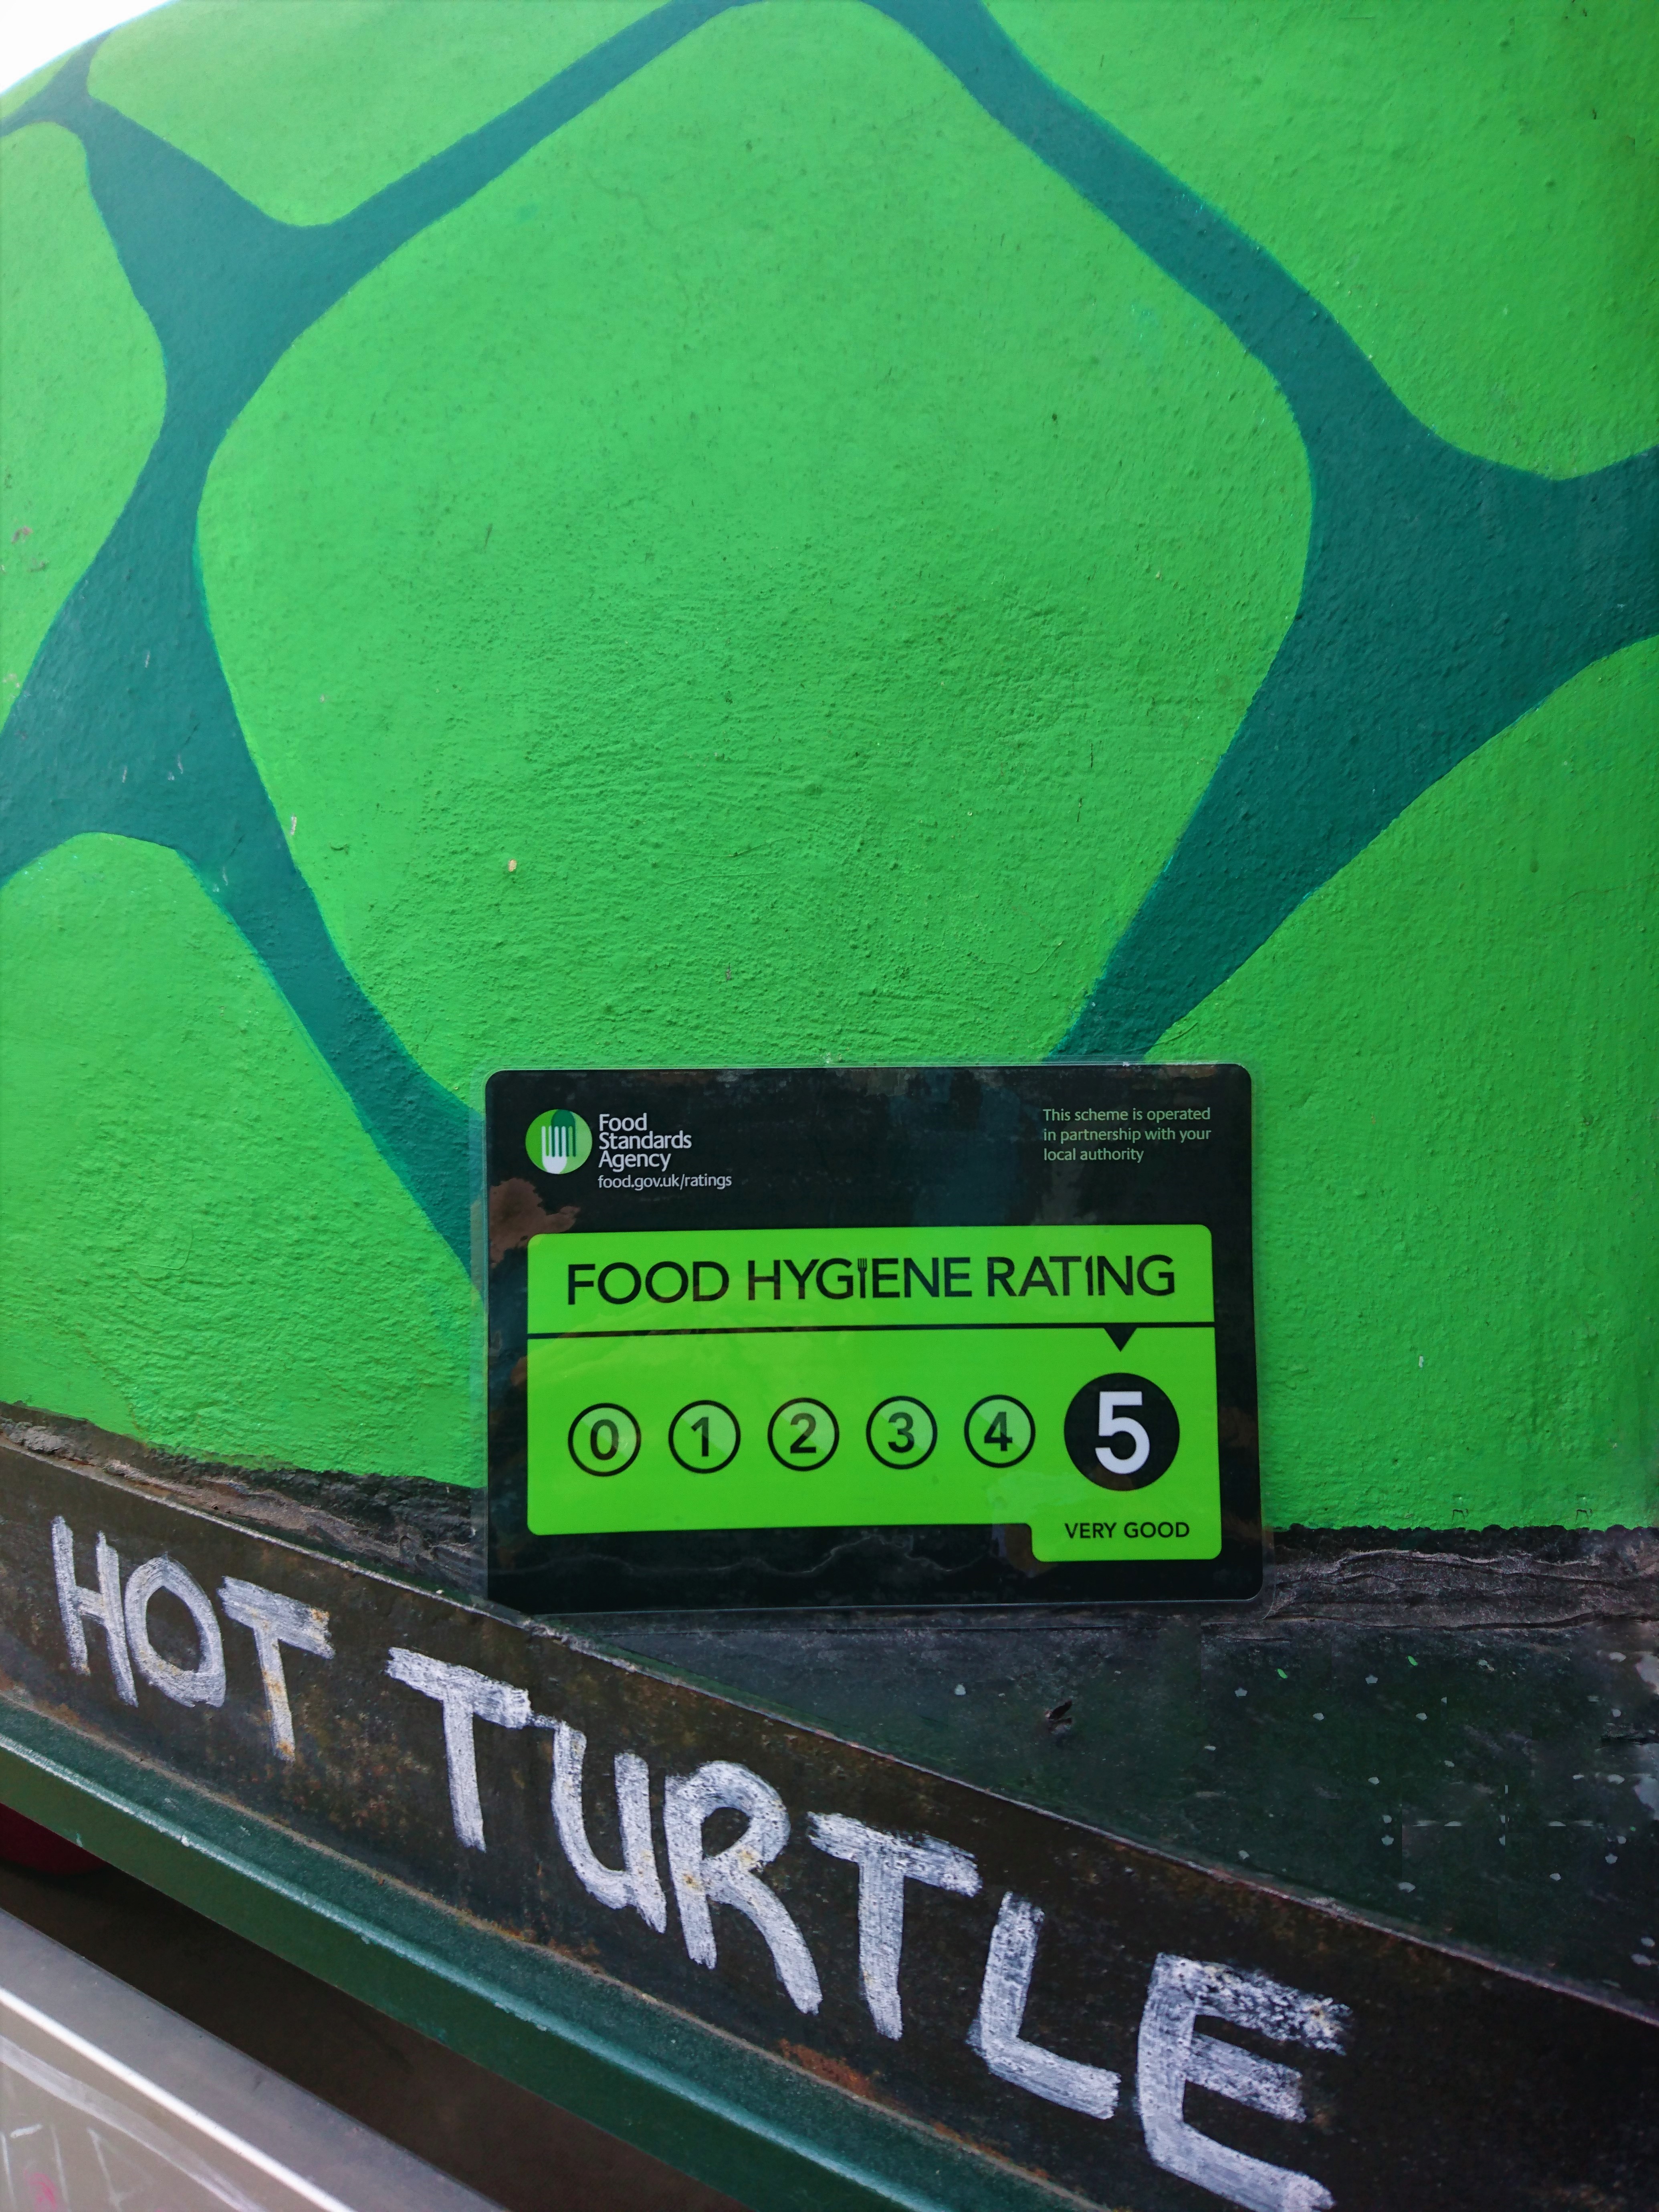 Hot Turtle Wood Fired Pizza Food Hygiene Rating